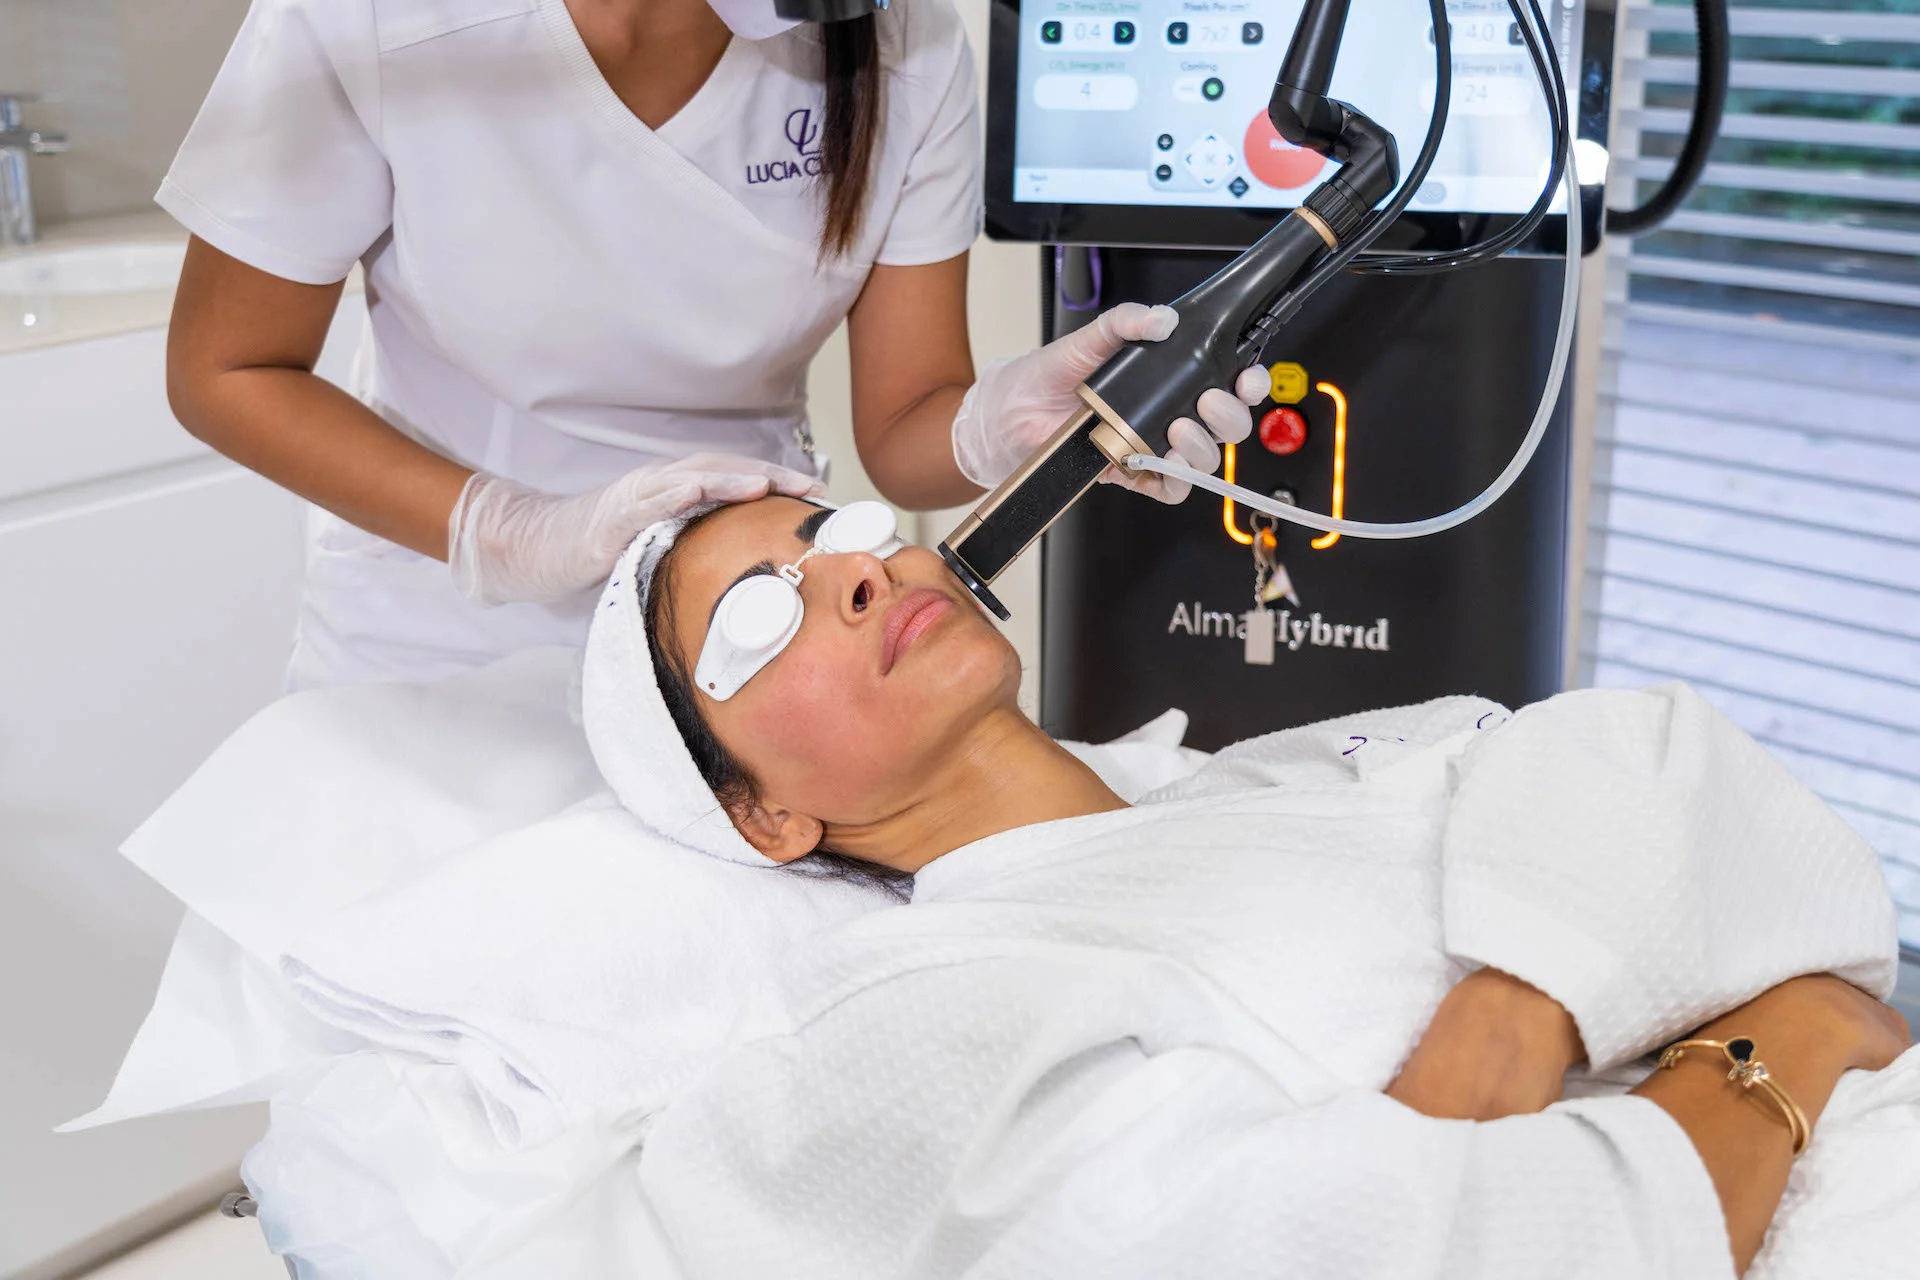 Alma Hybrid treatment or skin rejuvenation and tightening - reduce wrinkles and fine lines, hyperpigmentation and scars, and improve your skin tone and texture.